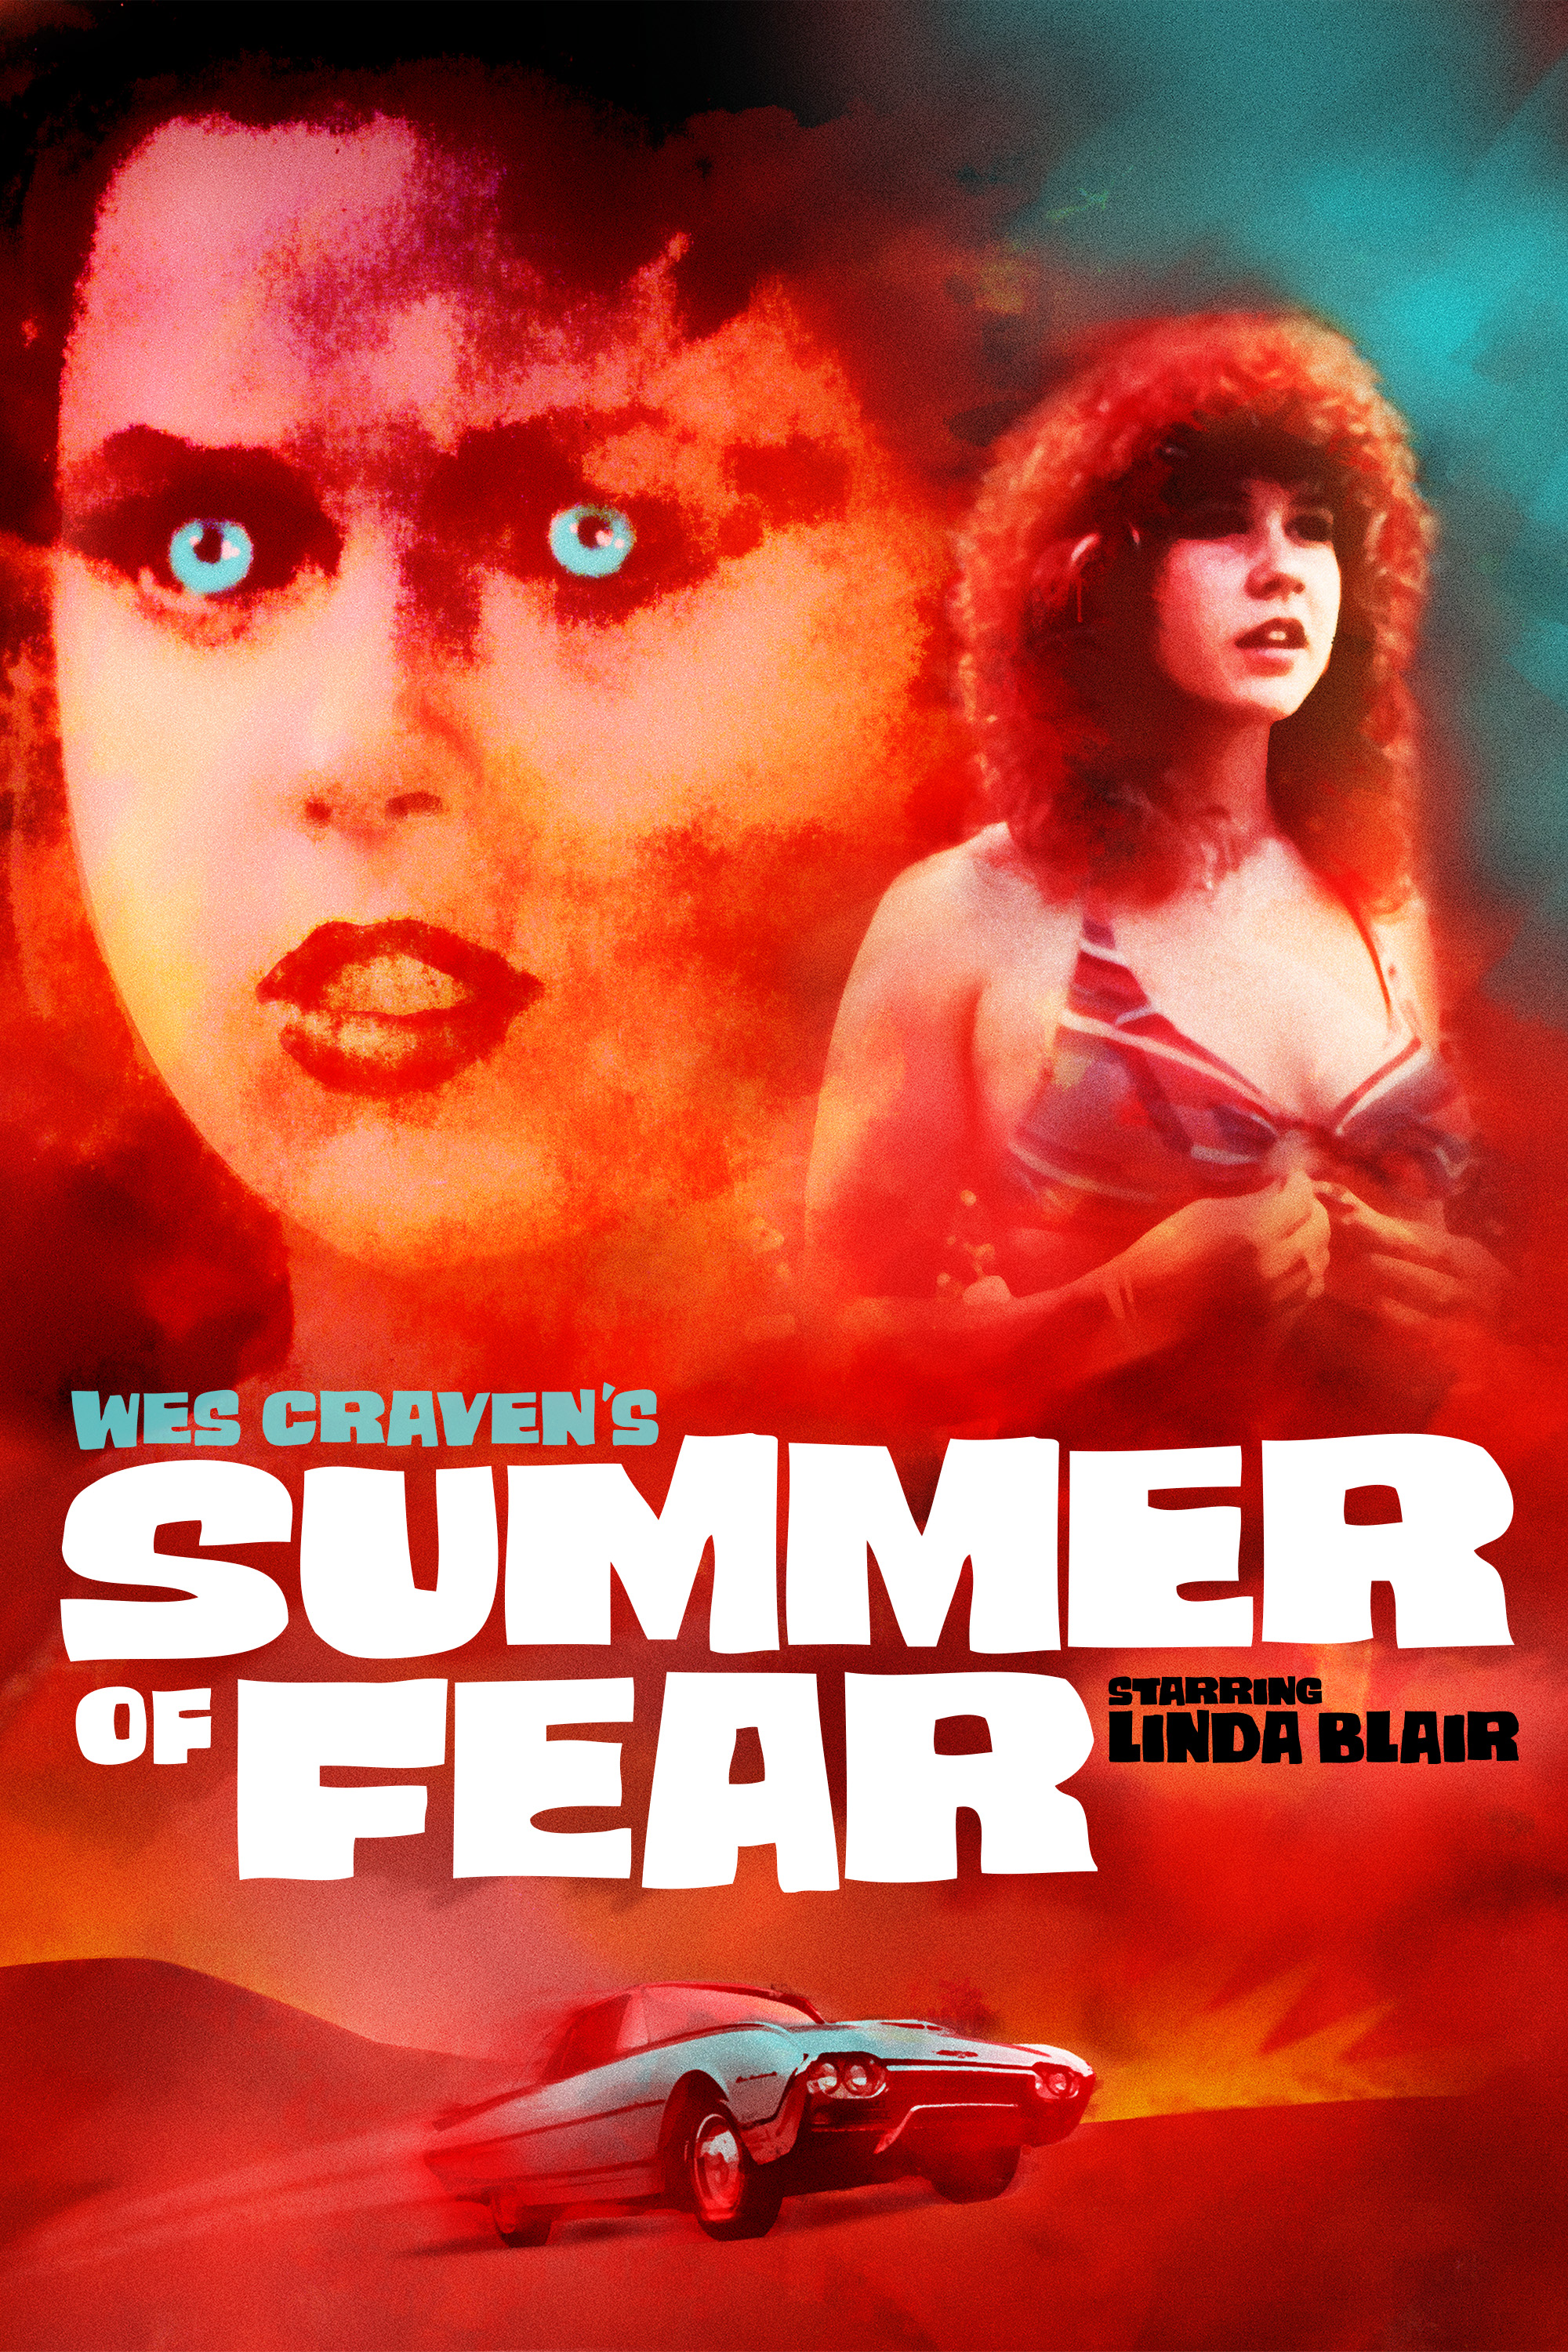 Wes Craven's Summer Of Fear